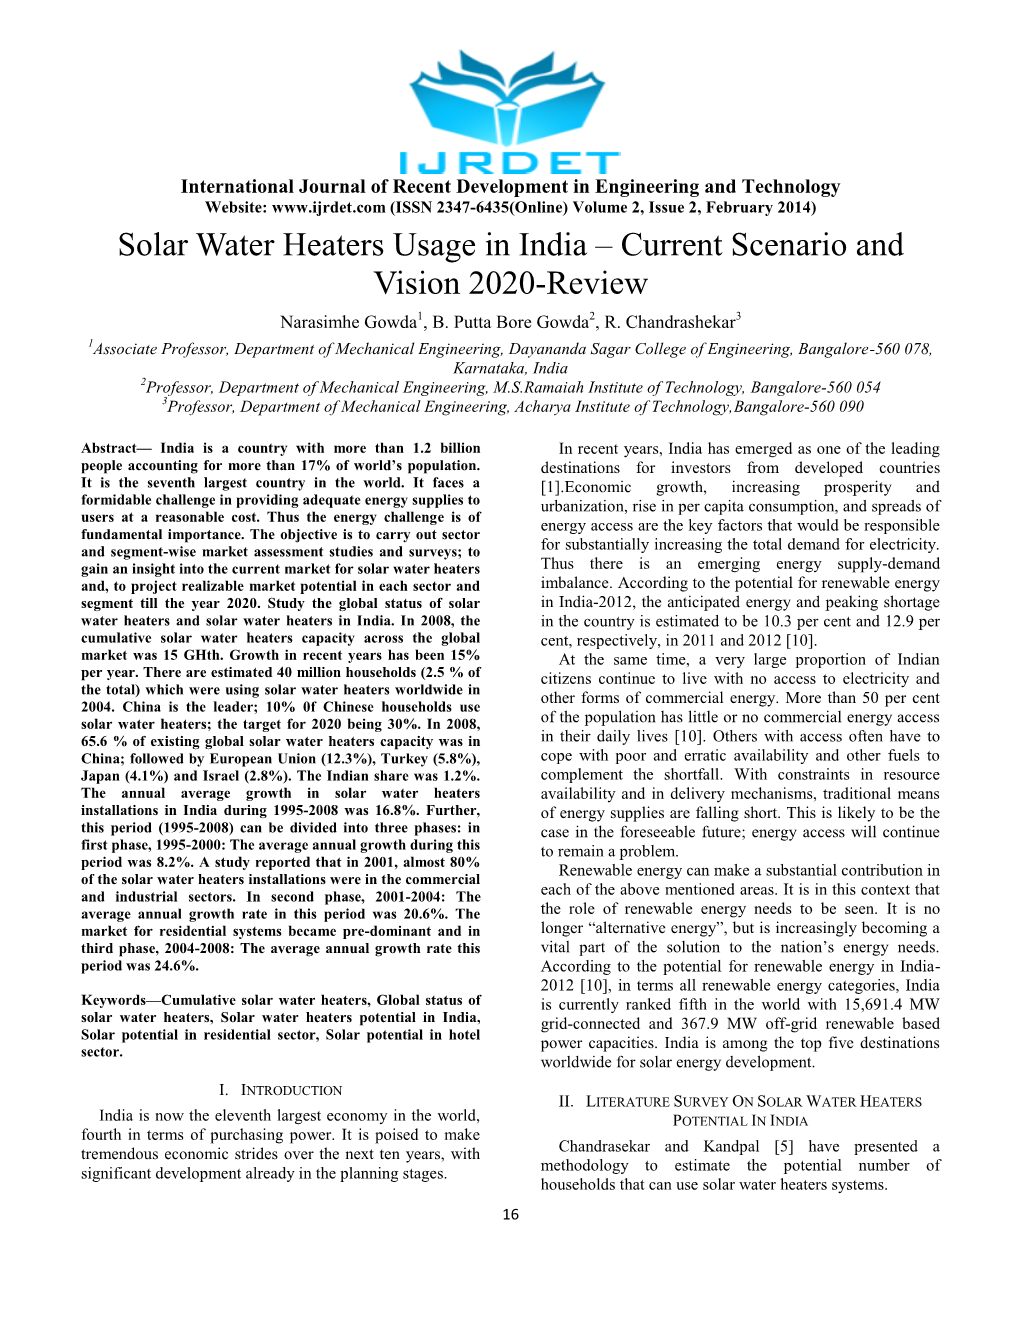 Solar Water Heaters Usage in India – Current Scenario and Vision 2020-Review Narasimhe Gowda1, B